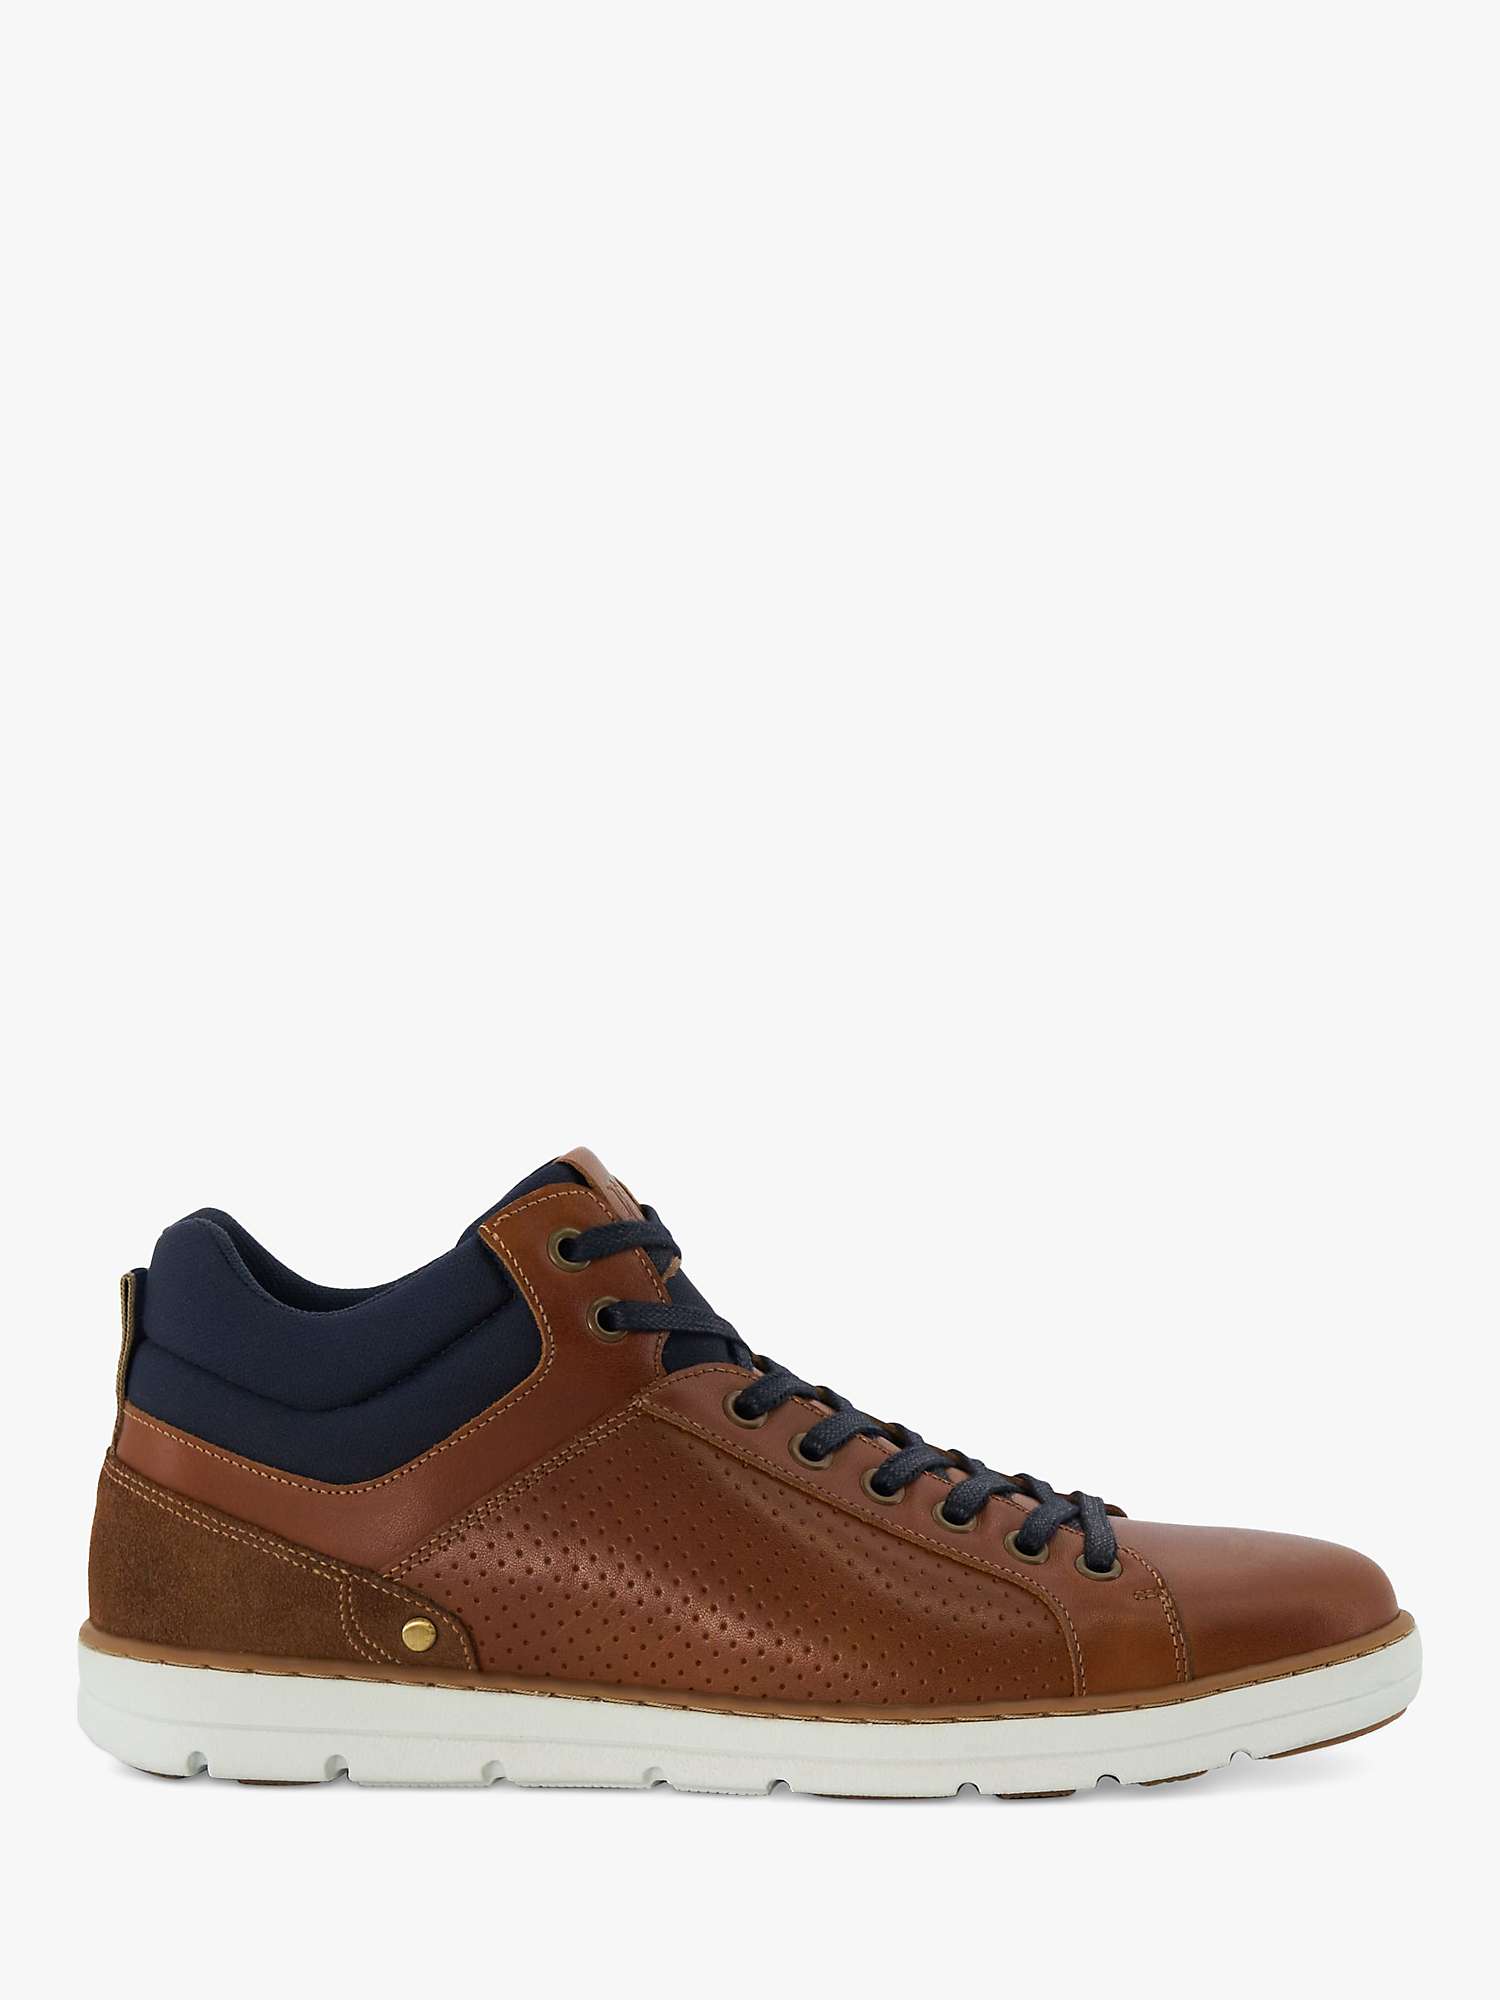 Buy Dune Southern Leather Hi-Top Trainers, Tan Online at johnlewis.com